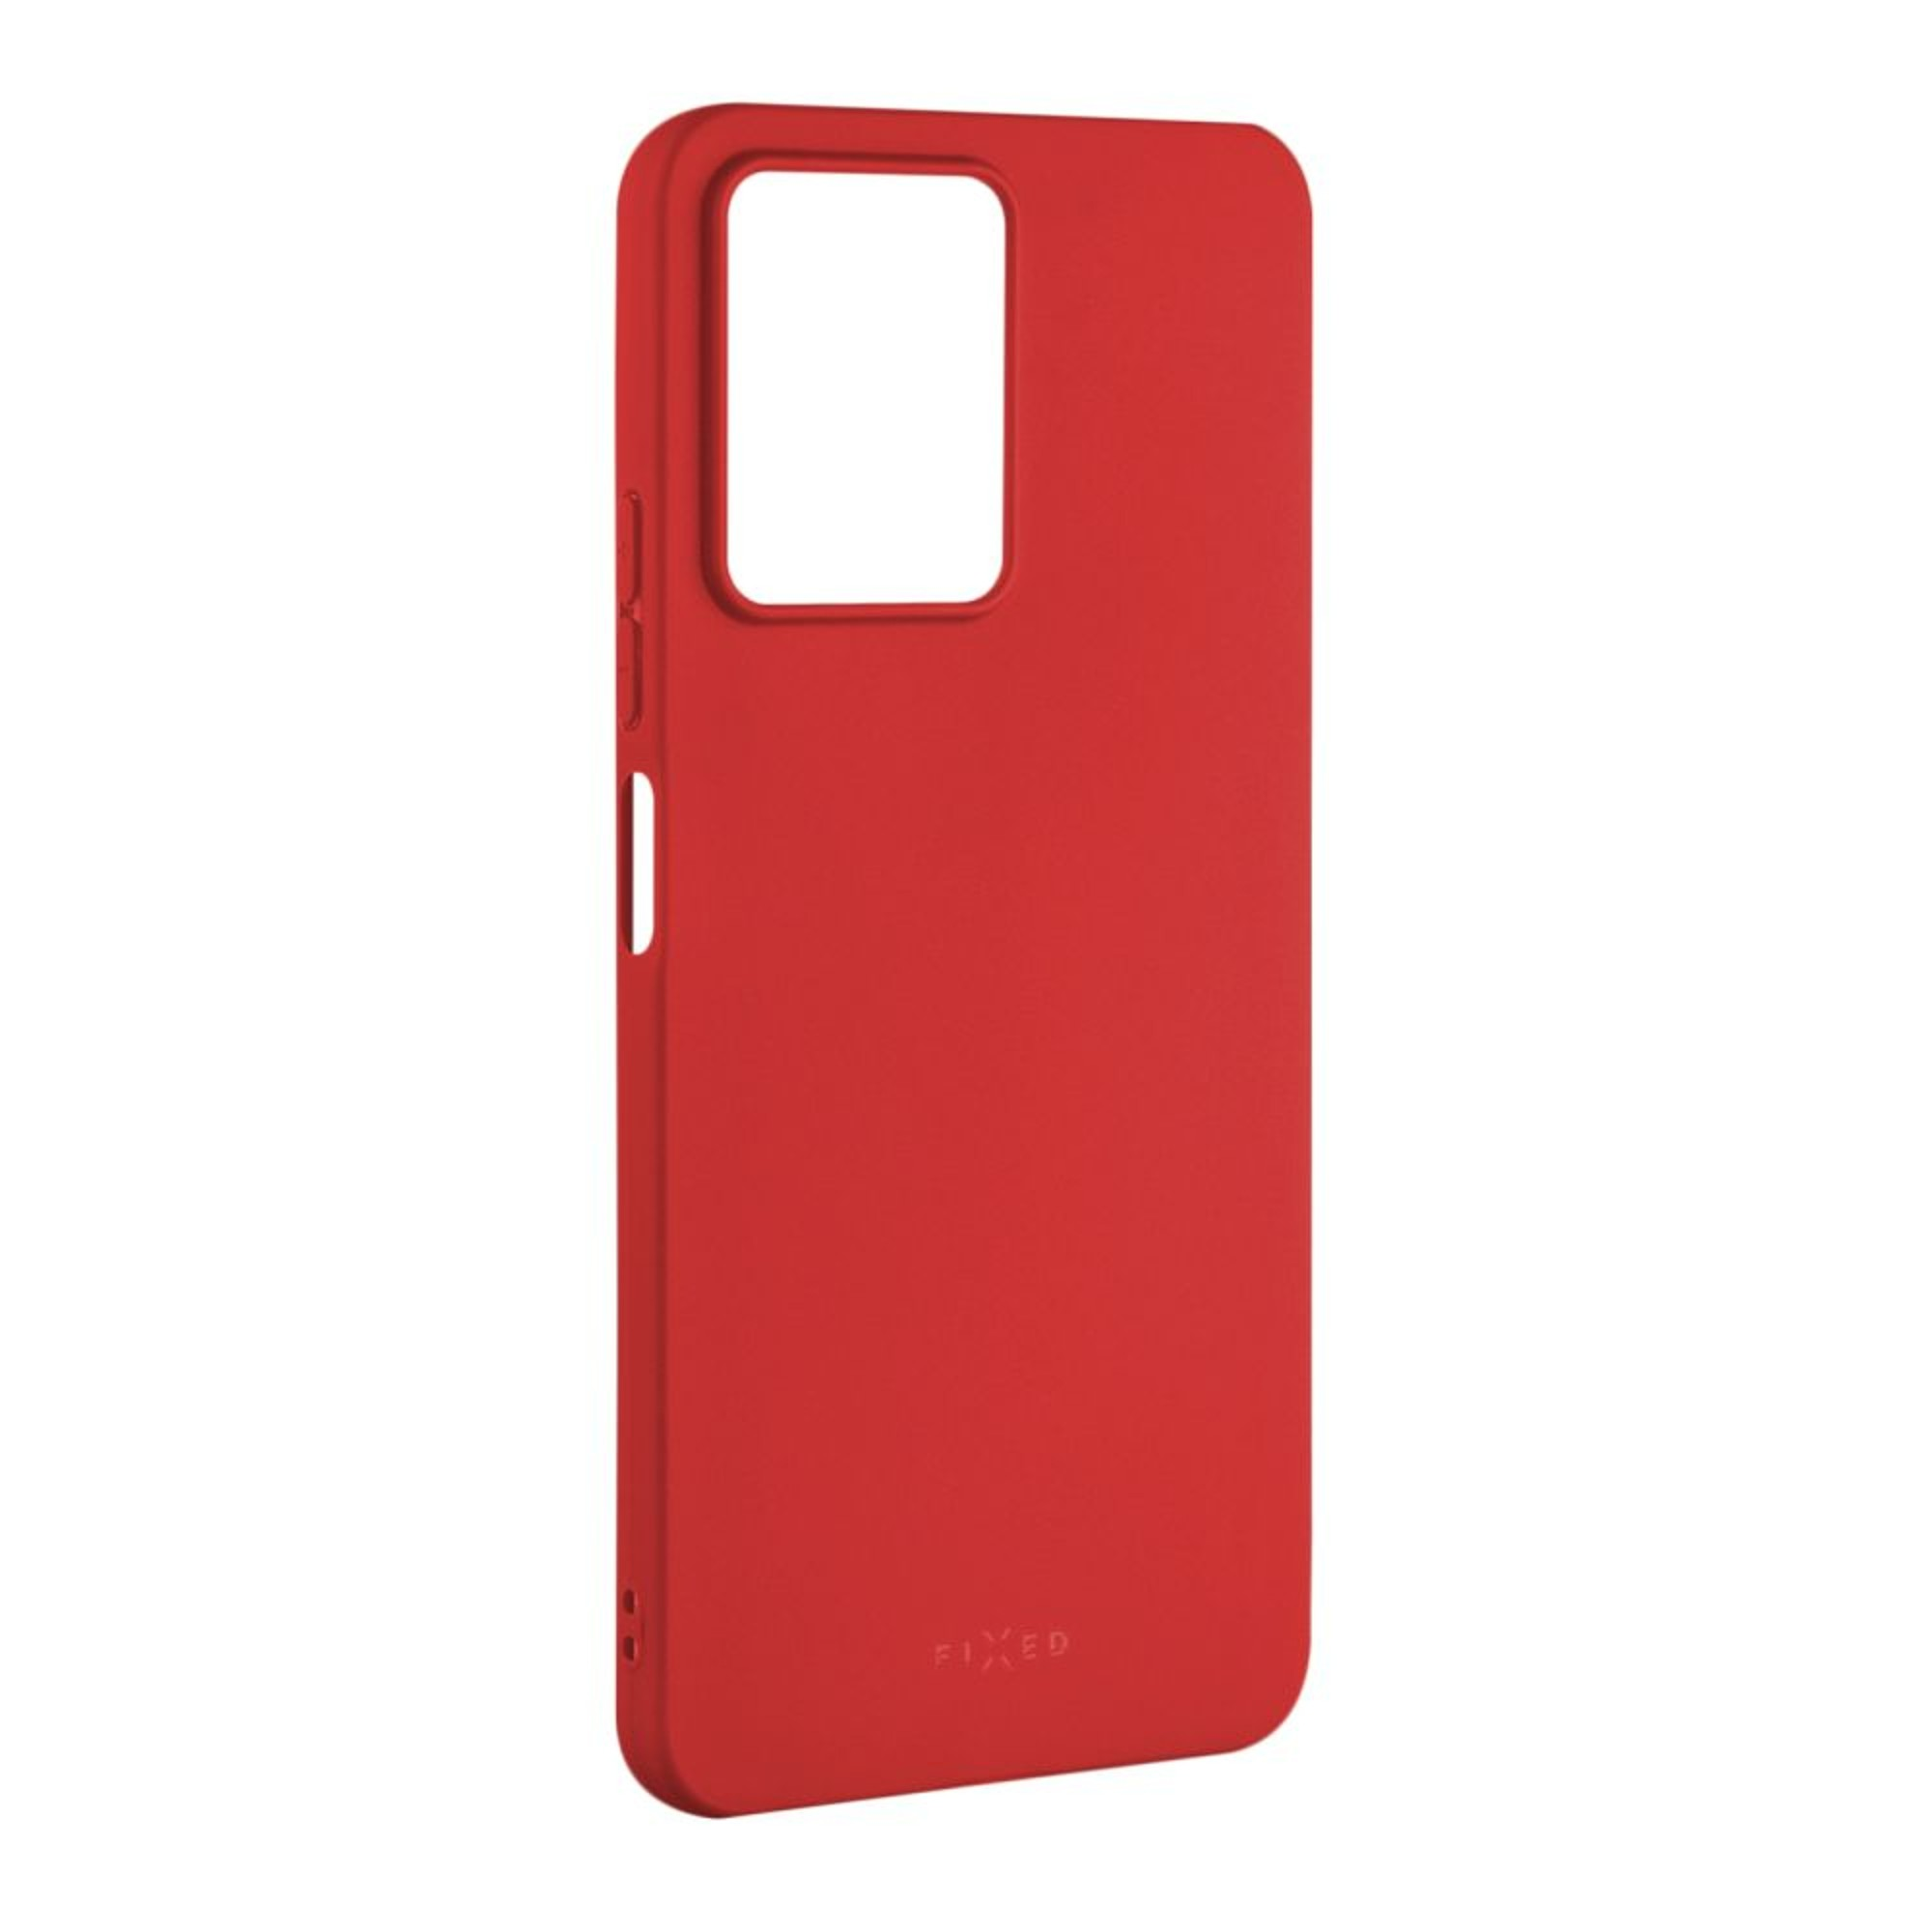 FIXED Story Backcover, 12, FIXST-955-RD, Xiaomi, Redmi Rot Note